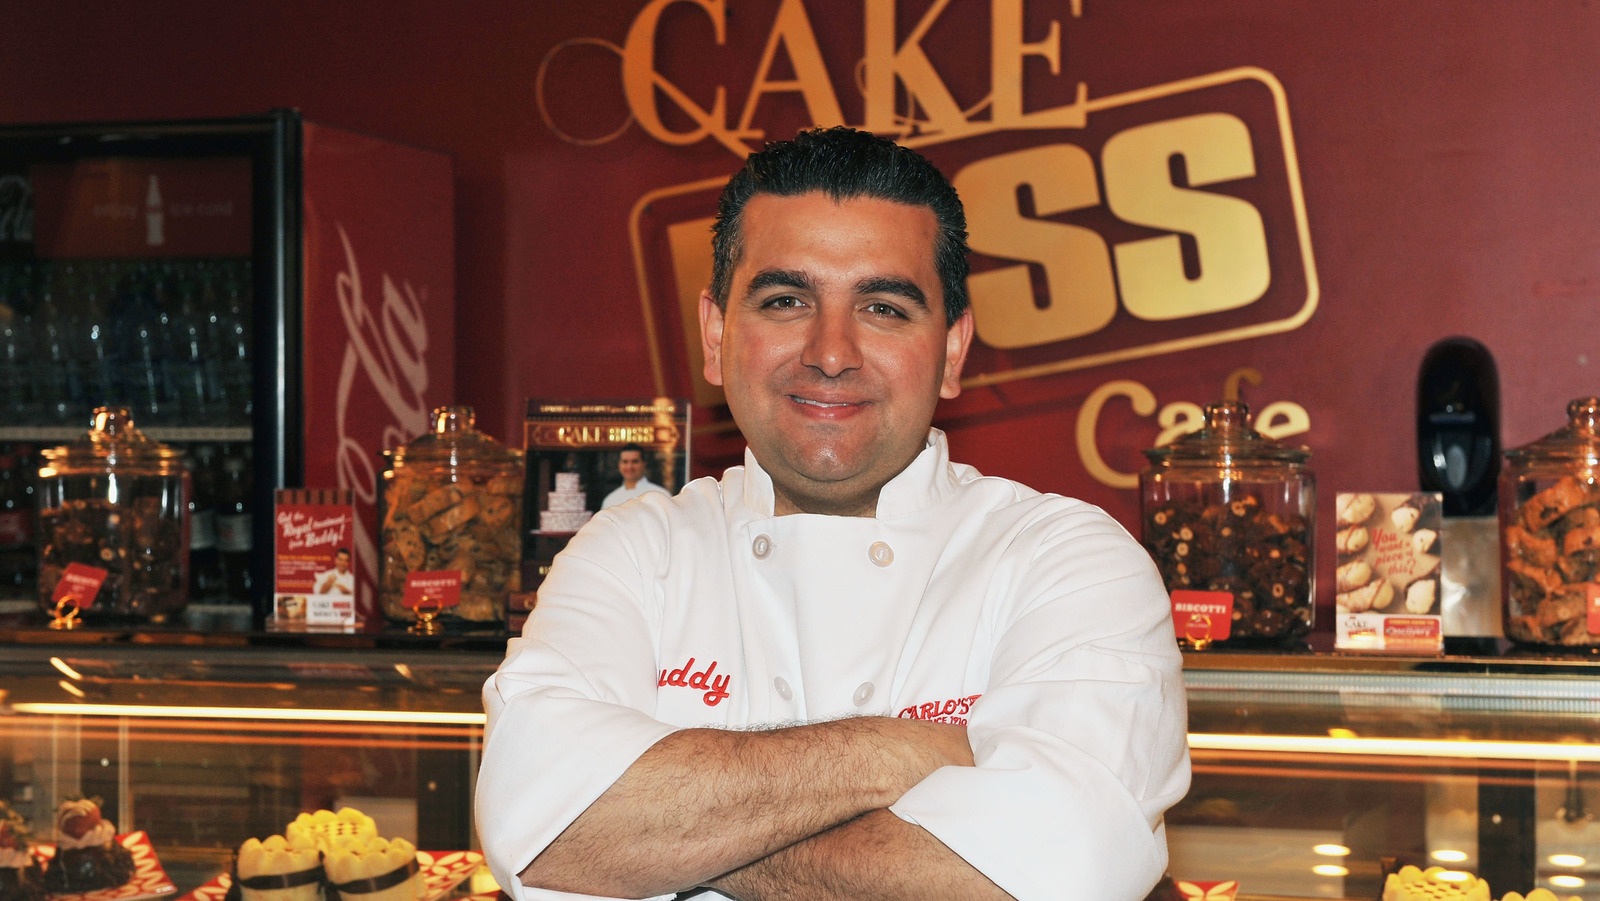 American blogger says 'Cake Boss' pizza vending machine is a tourist trap